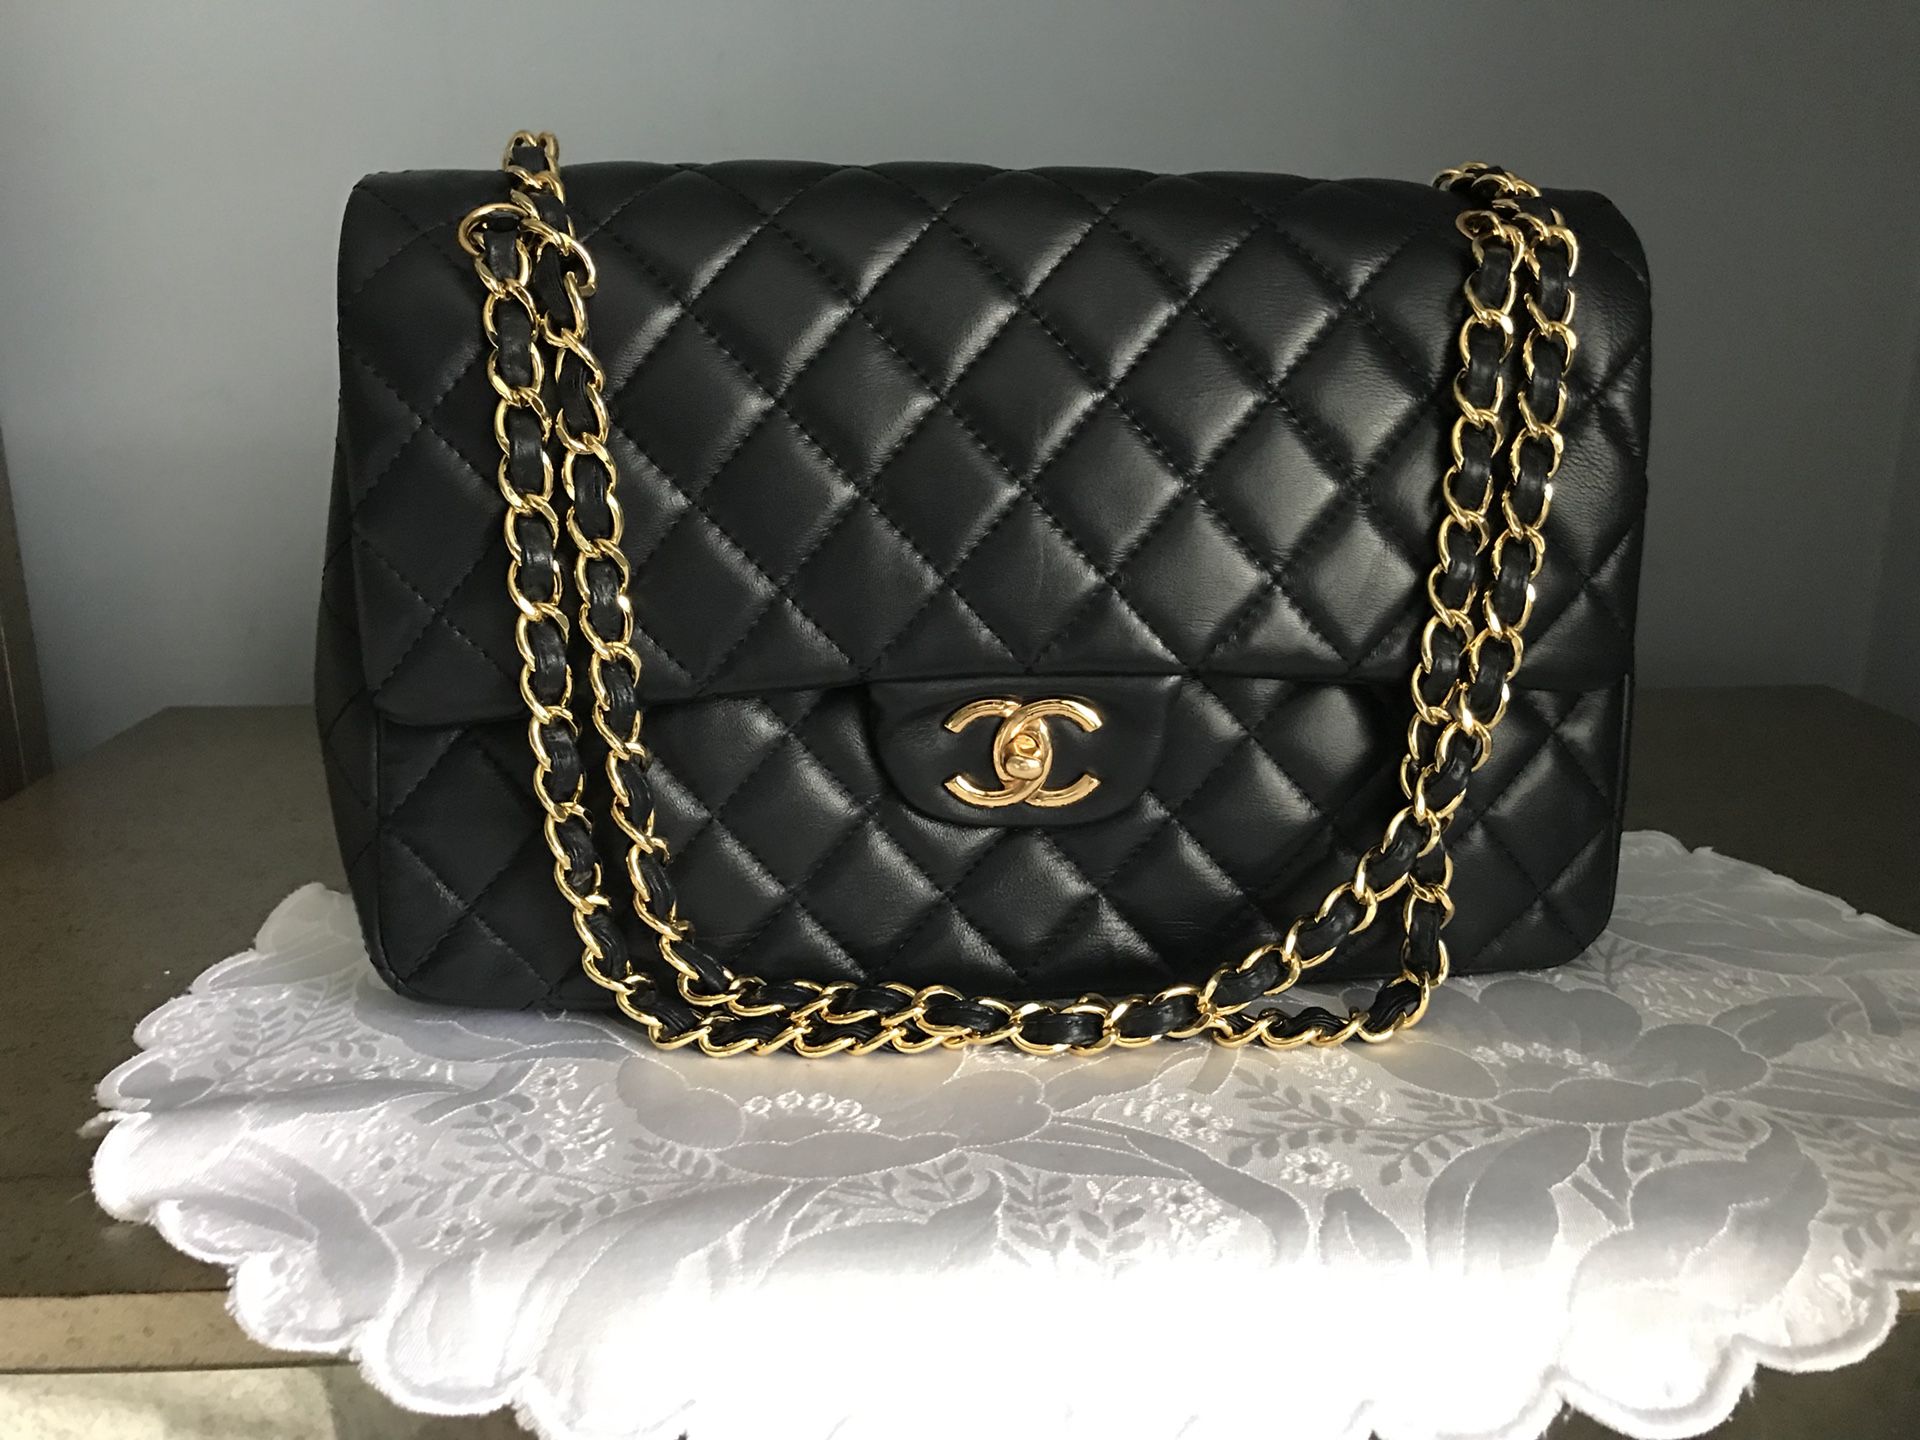 Chanel new never used